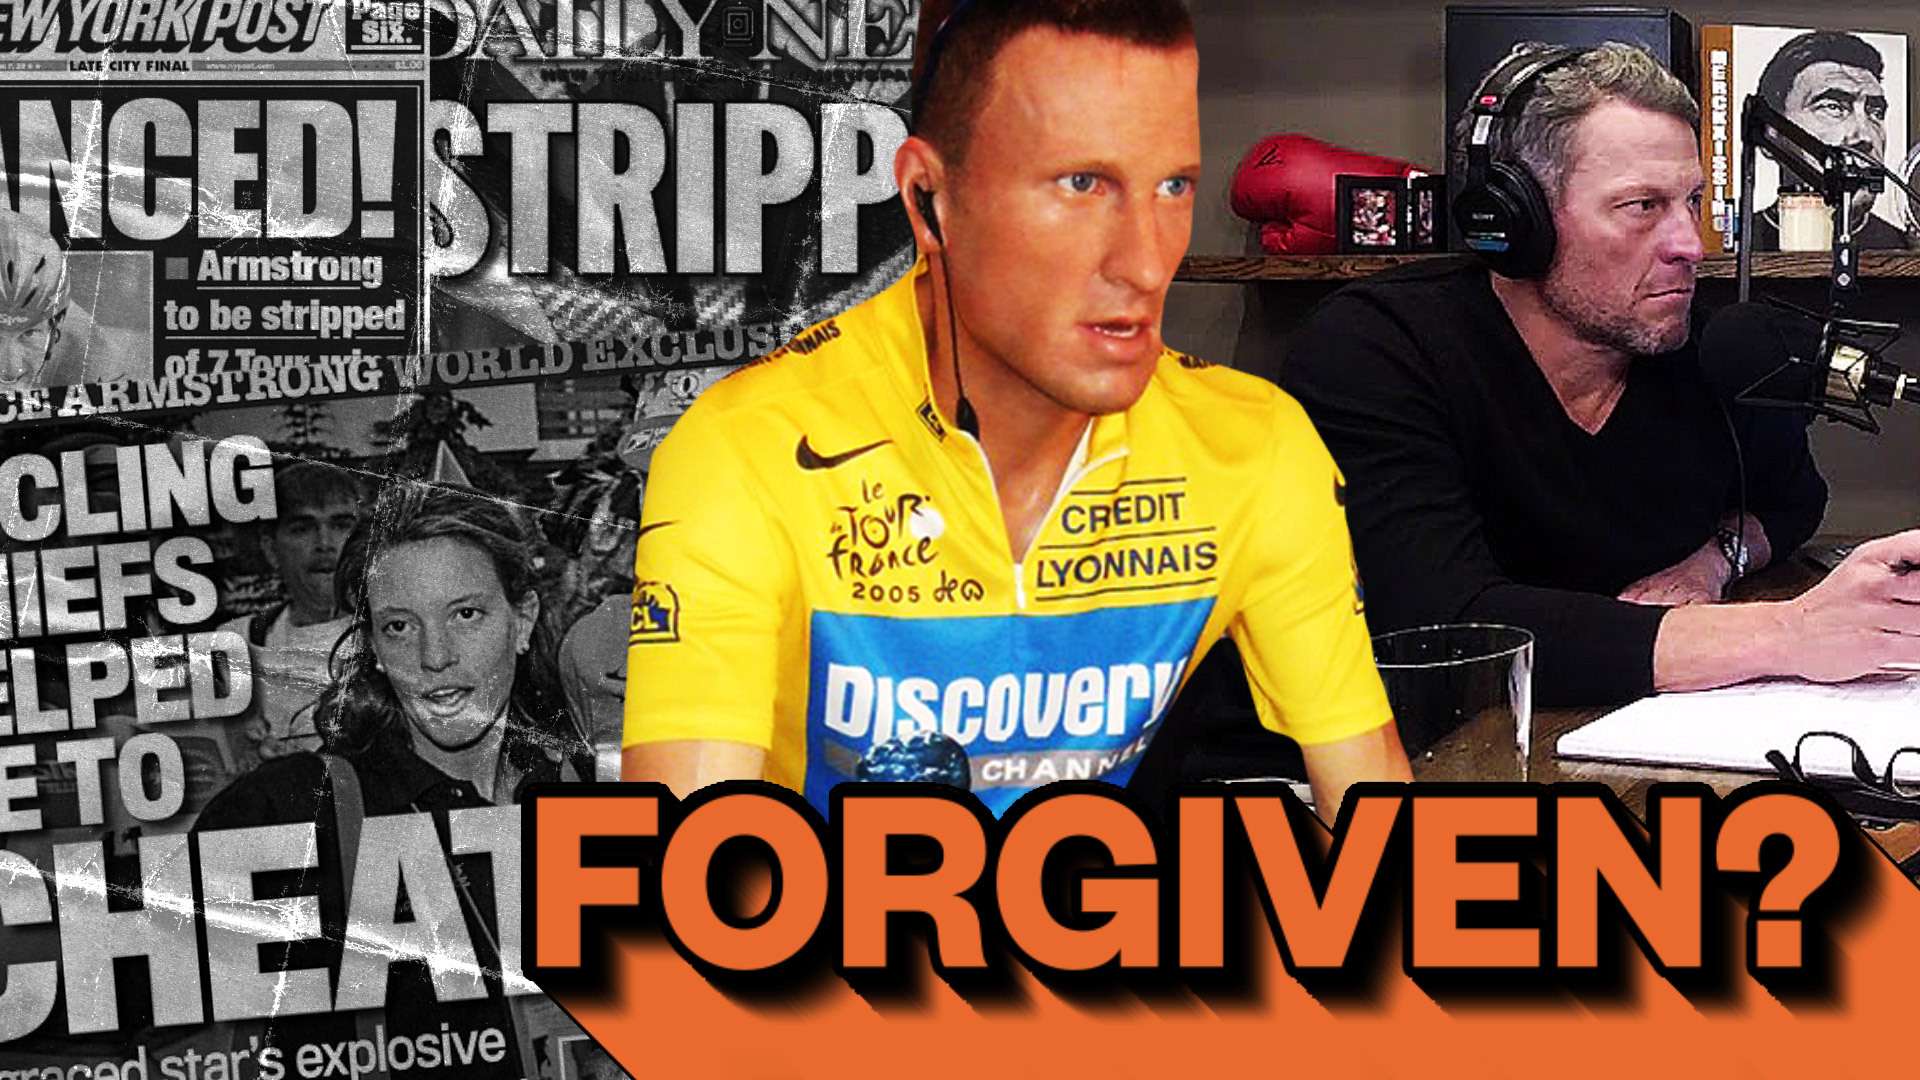 Is America Too Forgiving? The Case of Lance Armstrong